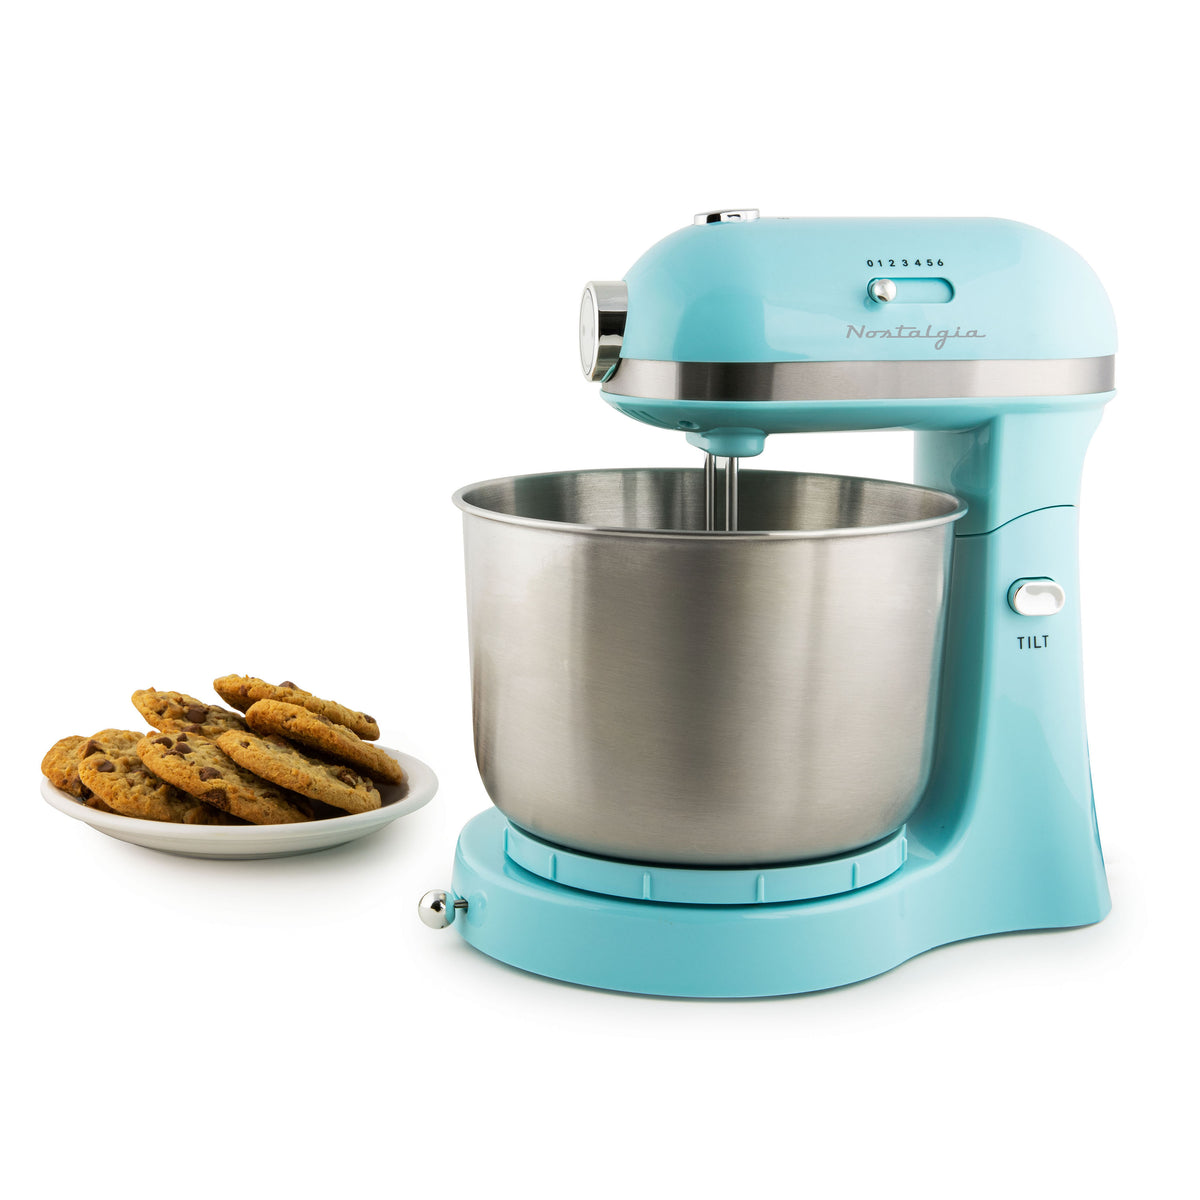 3.5 Qt Retro Stand Mixer with Tilt Head and Stainless Steel Bowl, Aqua —  Nostalgia Products